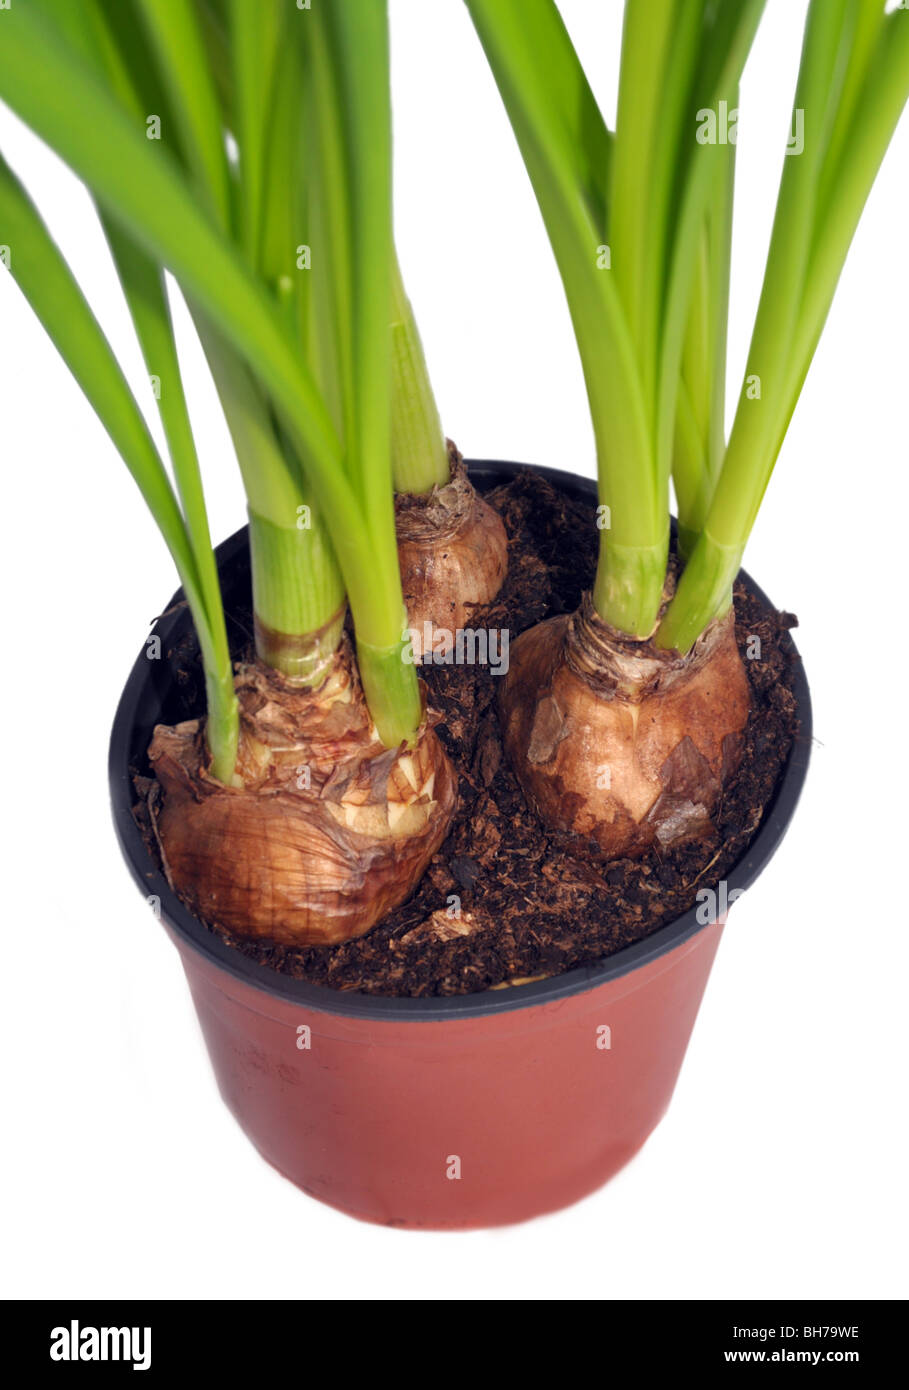 A cutout of a flower pot holding three mature / growing plant bulbs. Stock Photo